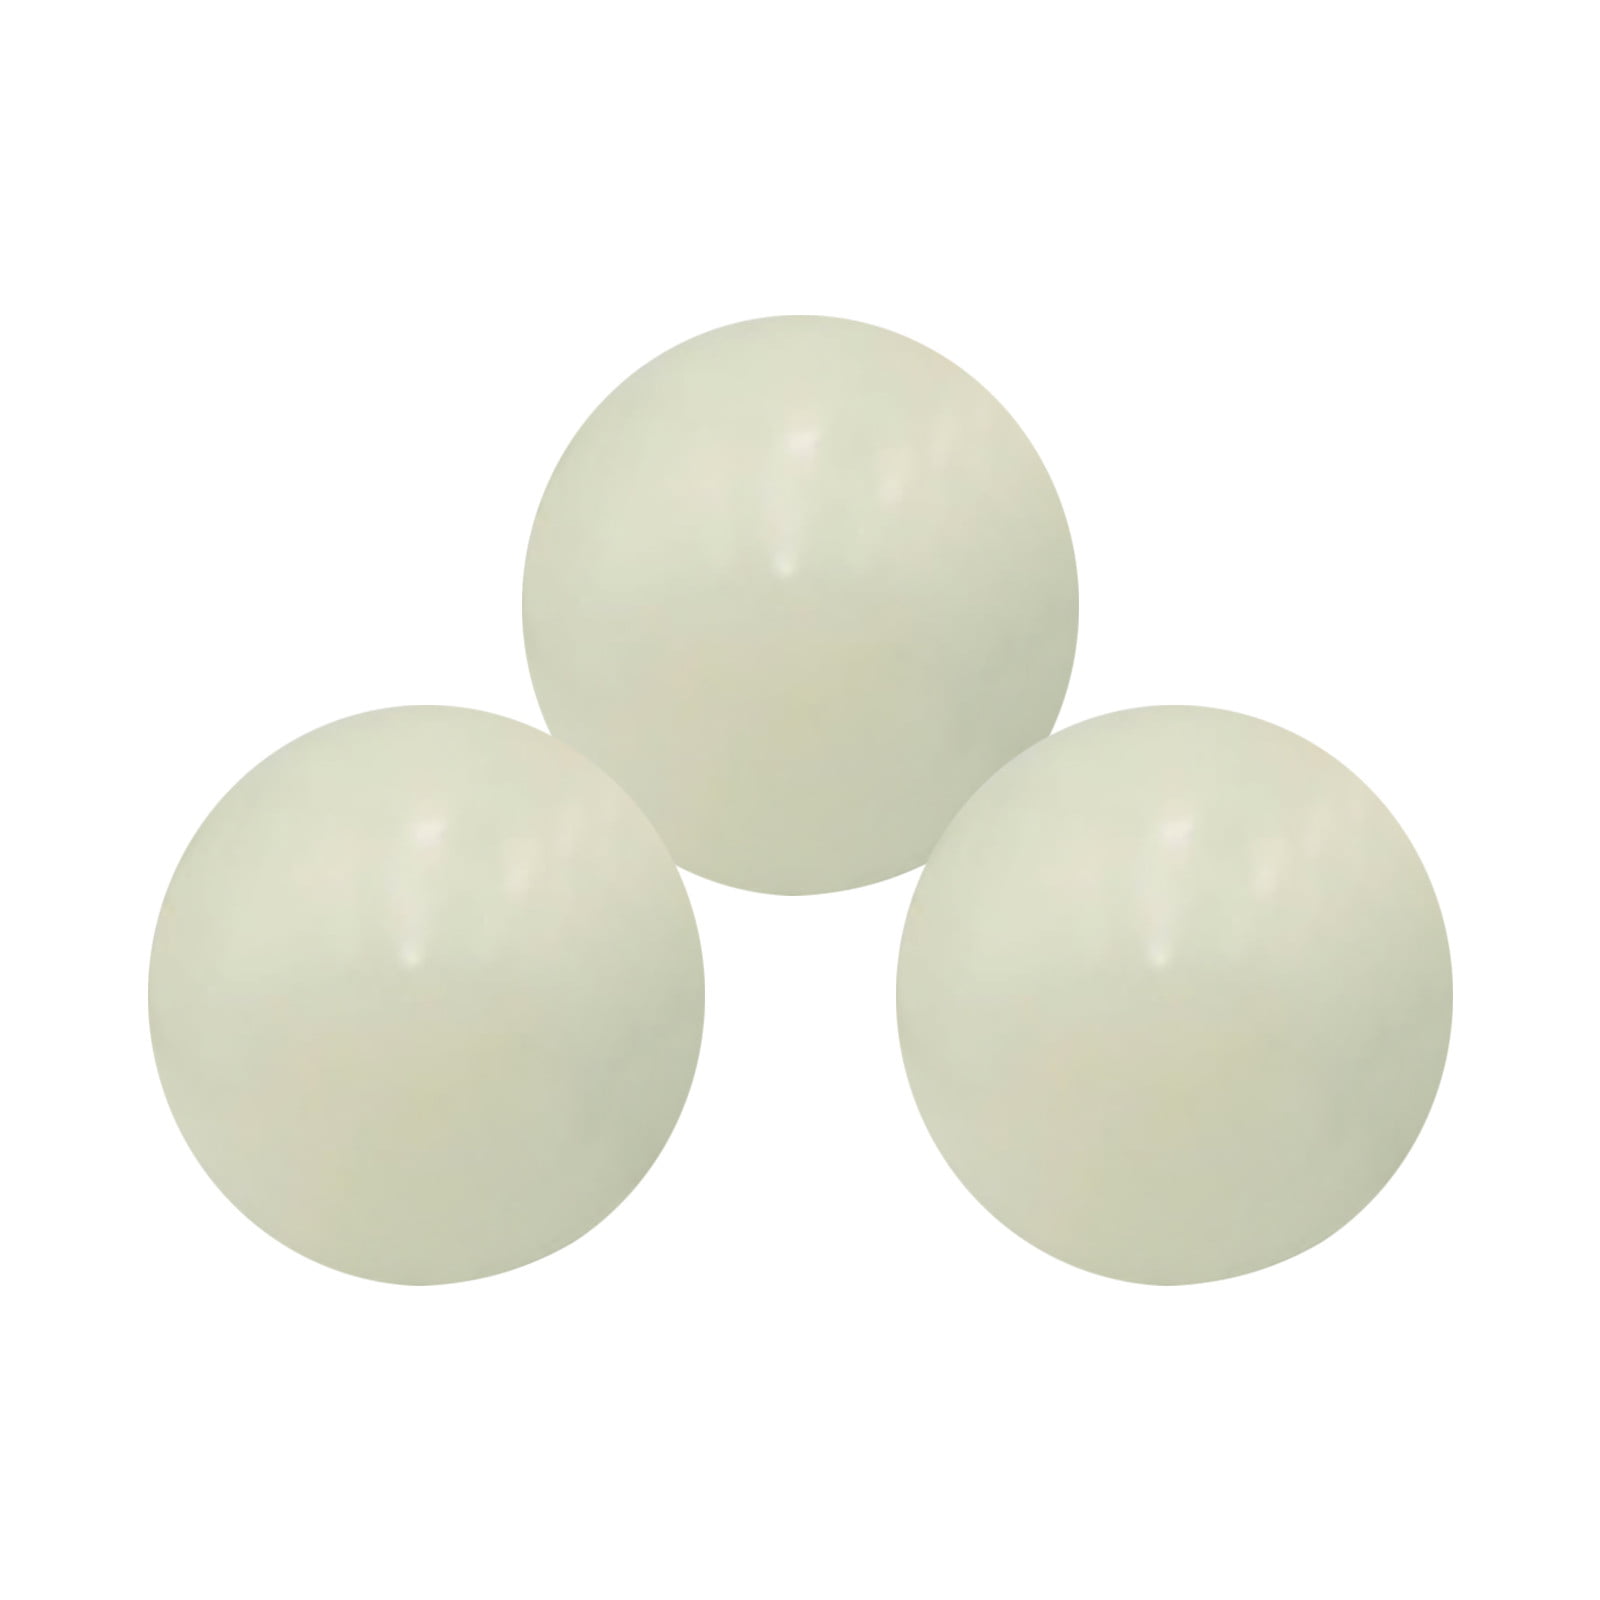 Details about   4X Sticky Wall Ball Fluorescent Sticky Target Ball Decompression Toy Kid  Gift 